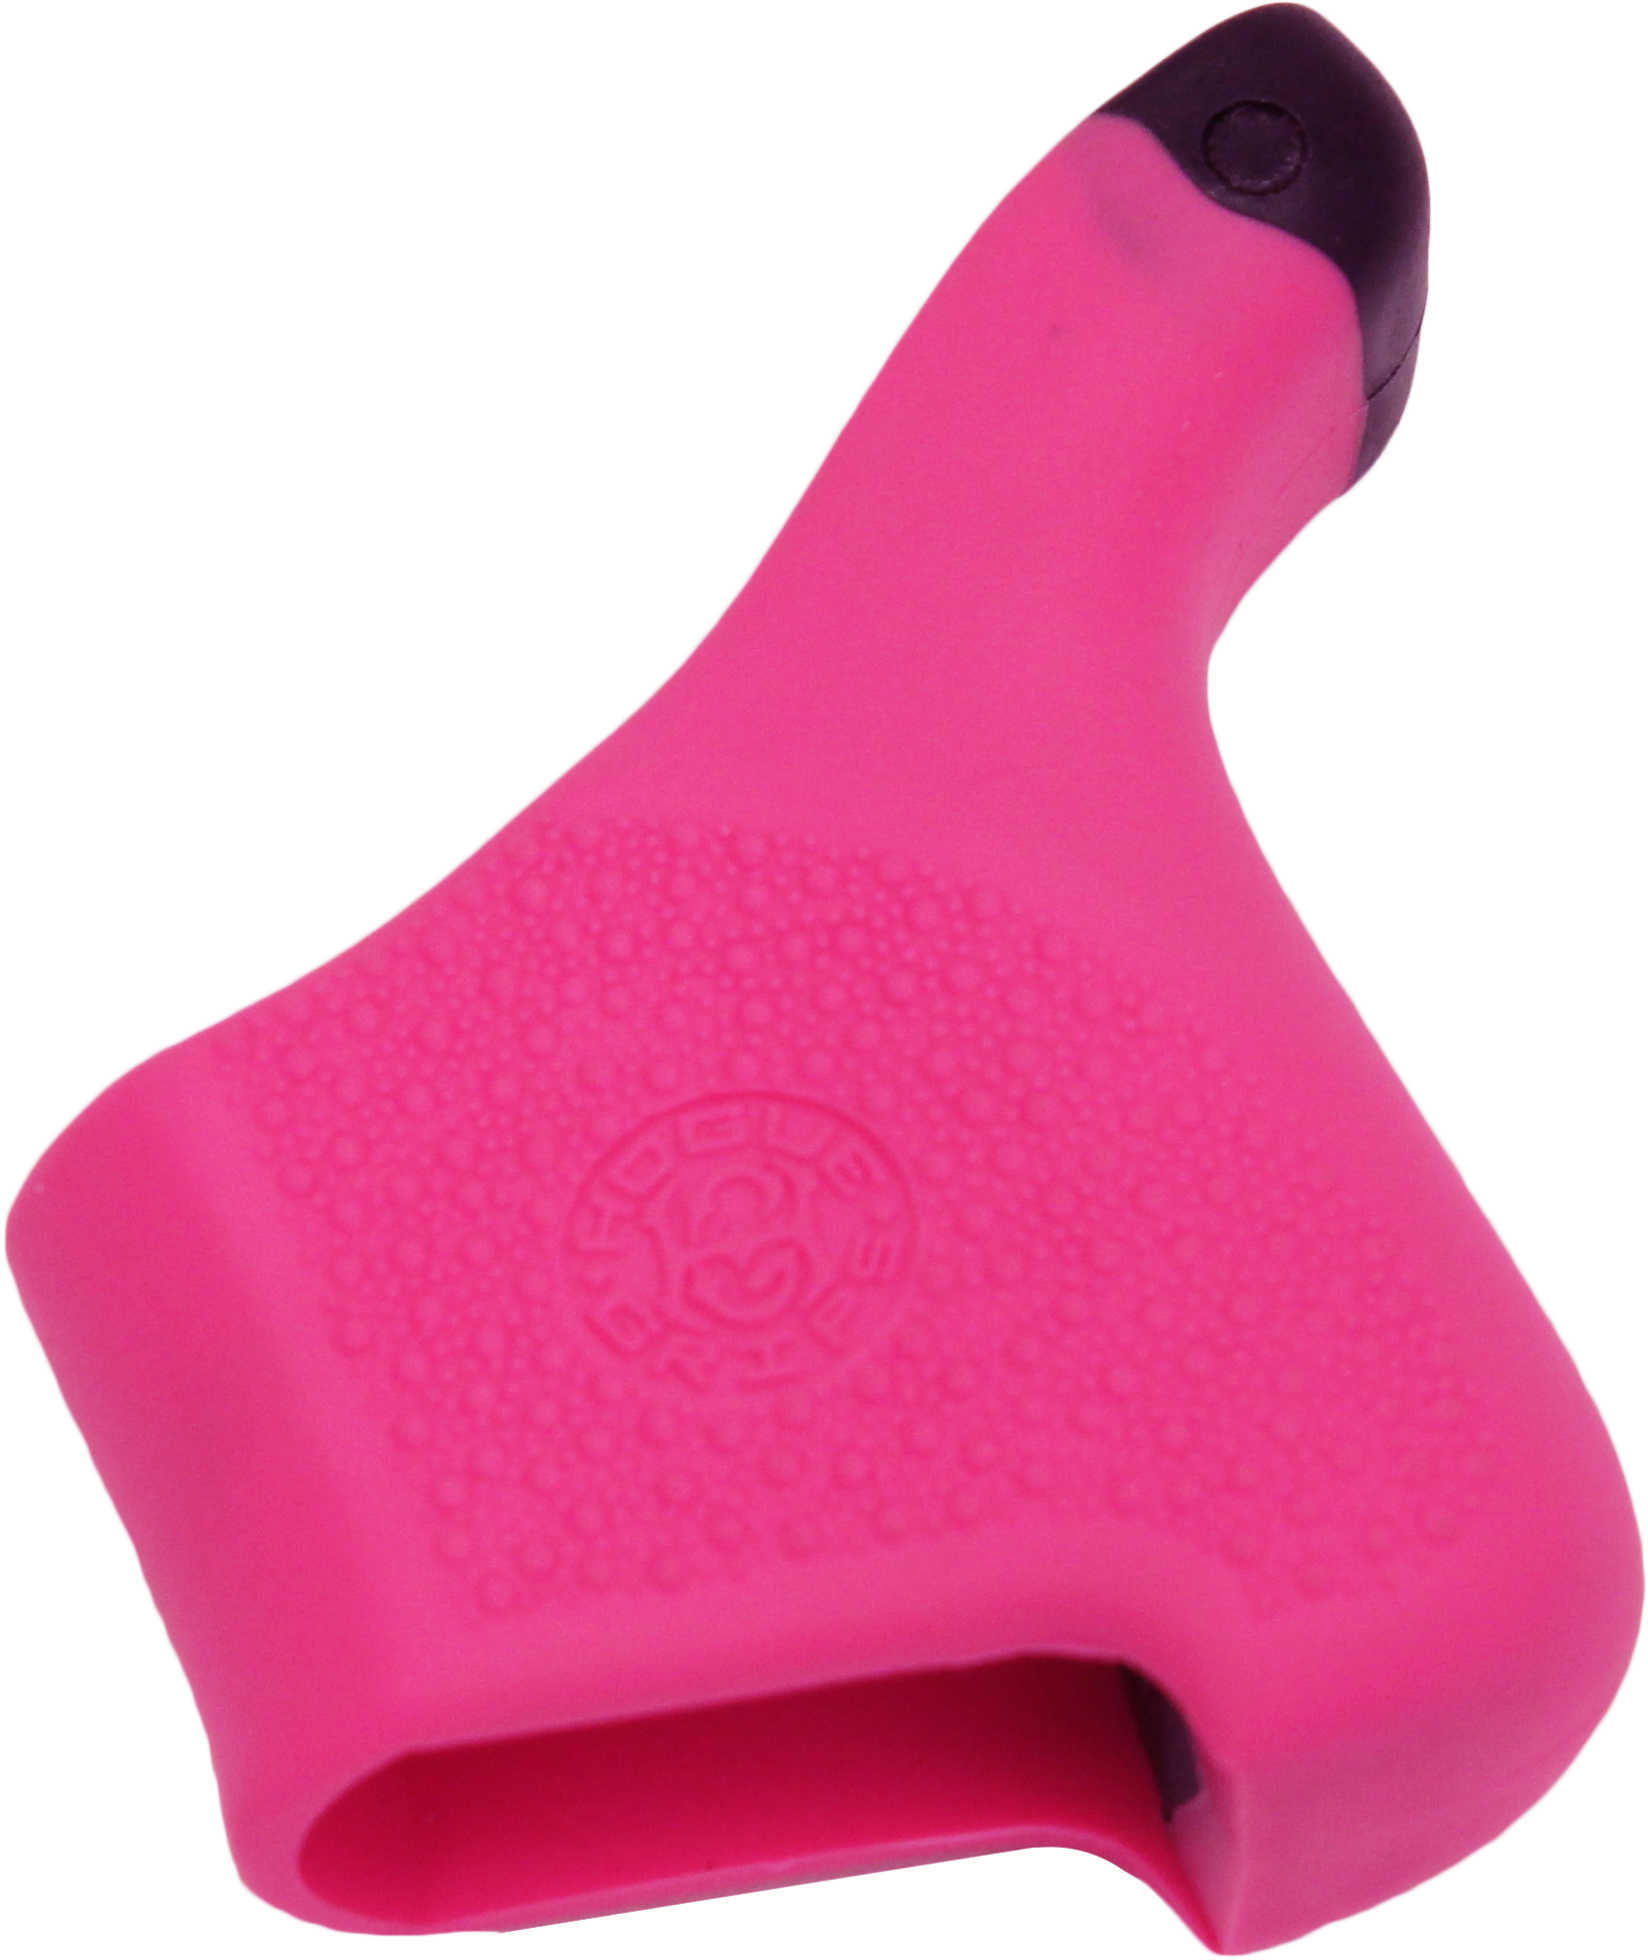 Hogue 18107 HandAll Hybrid Grip Sleeve Ruger LCP Textured Rubber Pink